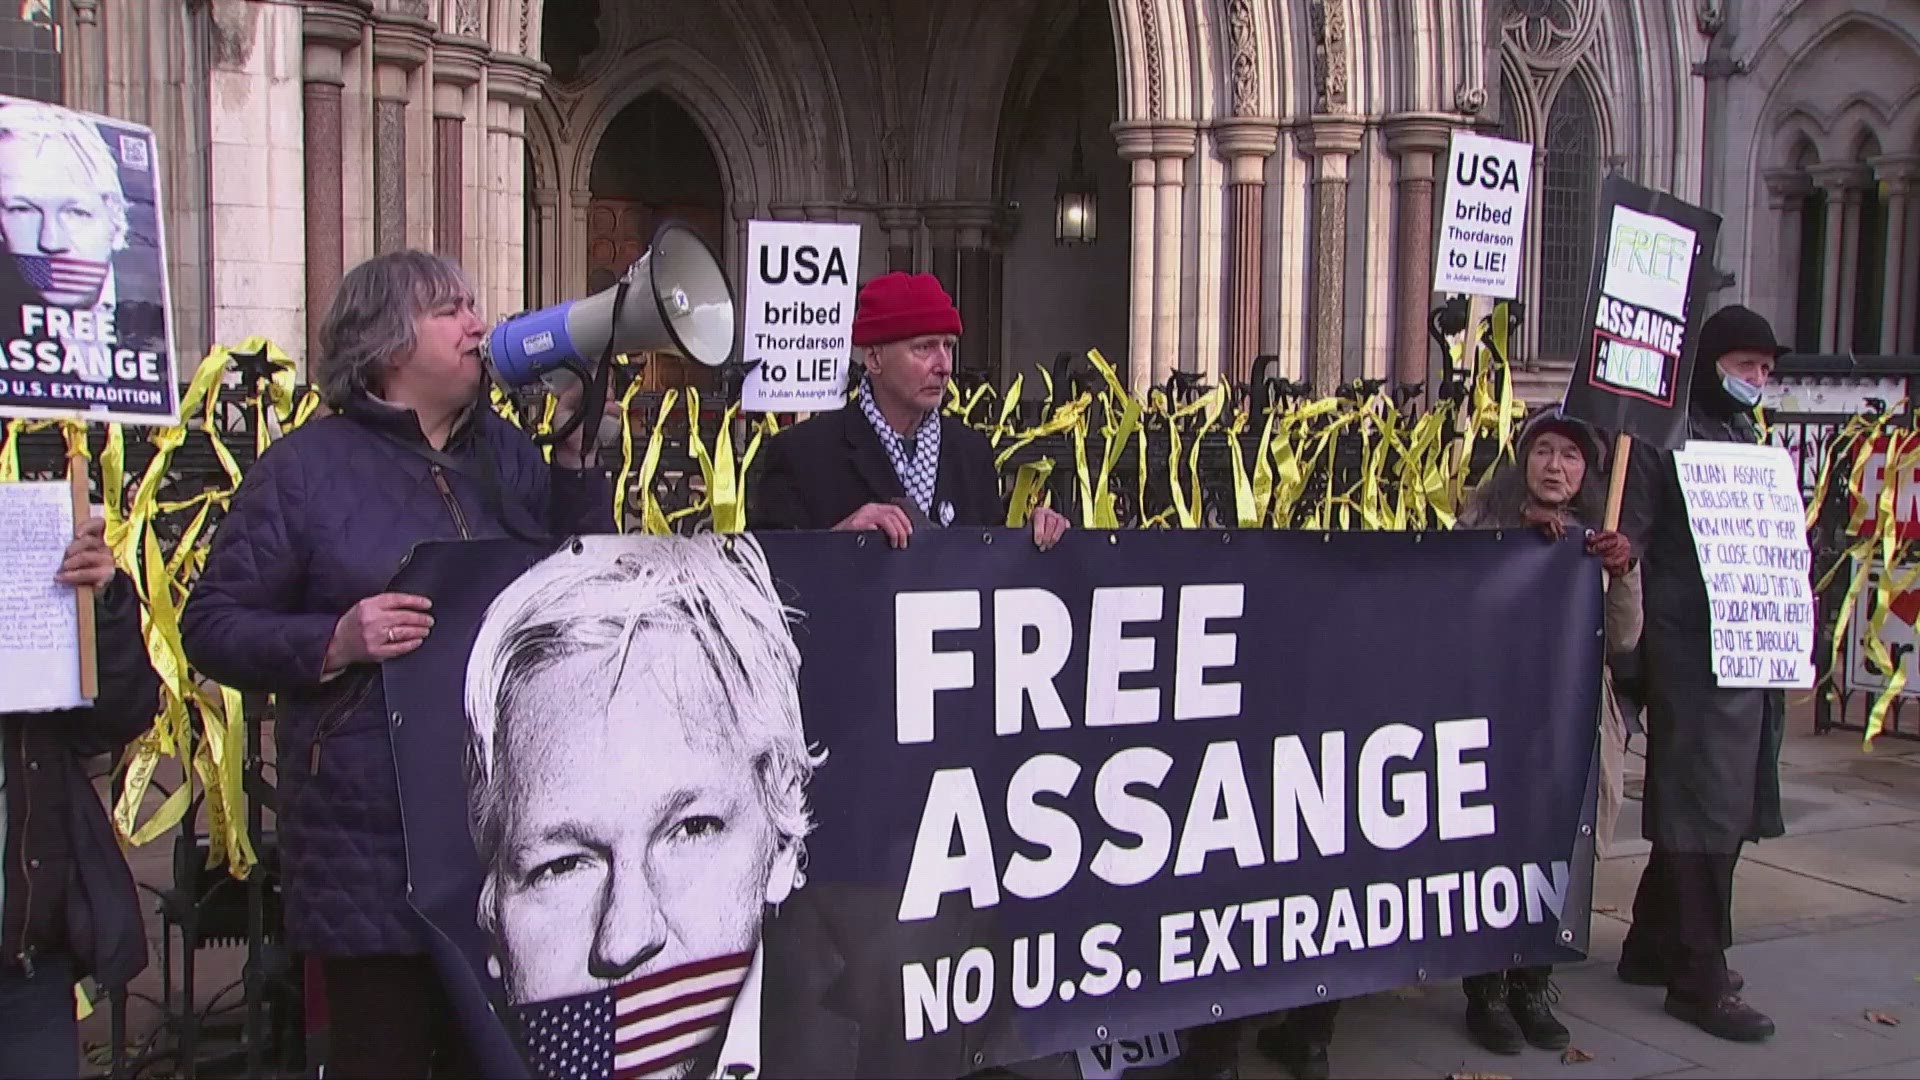 A big win for U.S. authorities, and a big loss for supporters of Julian Assange.